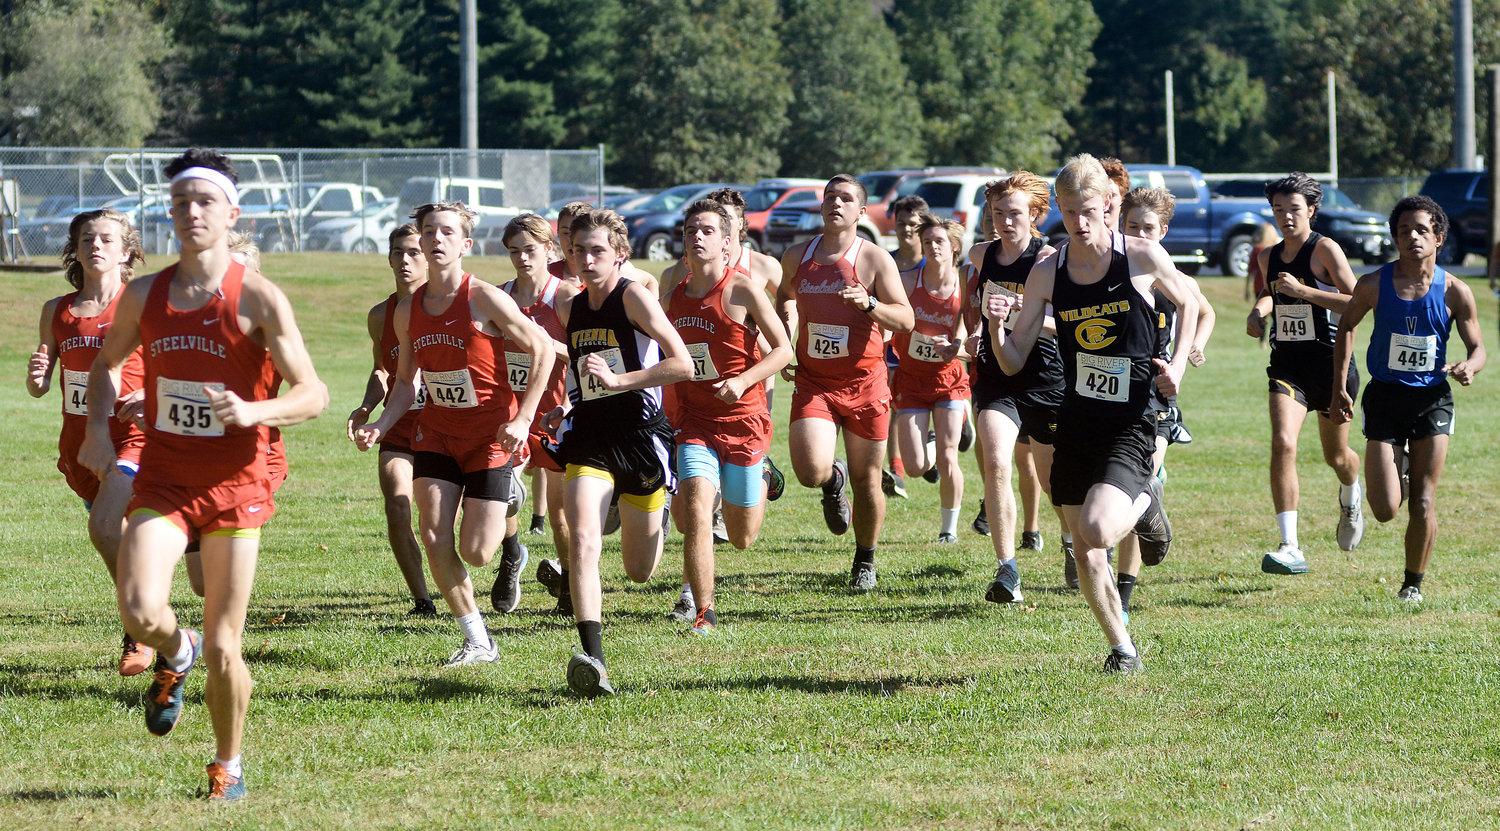 Vienna Eagle harriers (above, from left) Cooper Auten, Kamden George, Danniel Casey (hidden), Duncan Wilkinson and Jackson Kilmer were among the varsity boys in the field during the Gasconade Valley Conference (GVC) Cross Country meet held Friday afternoon at Steelville Community Park.